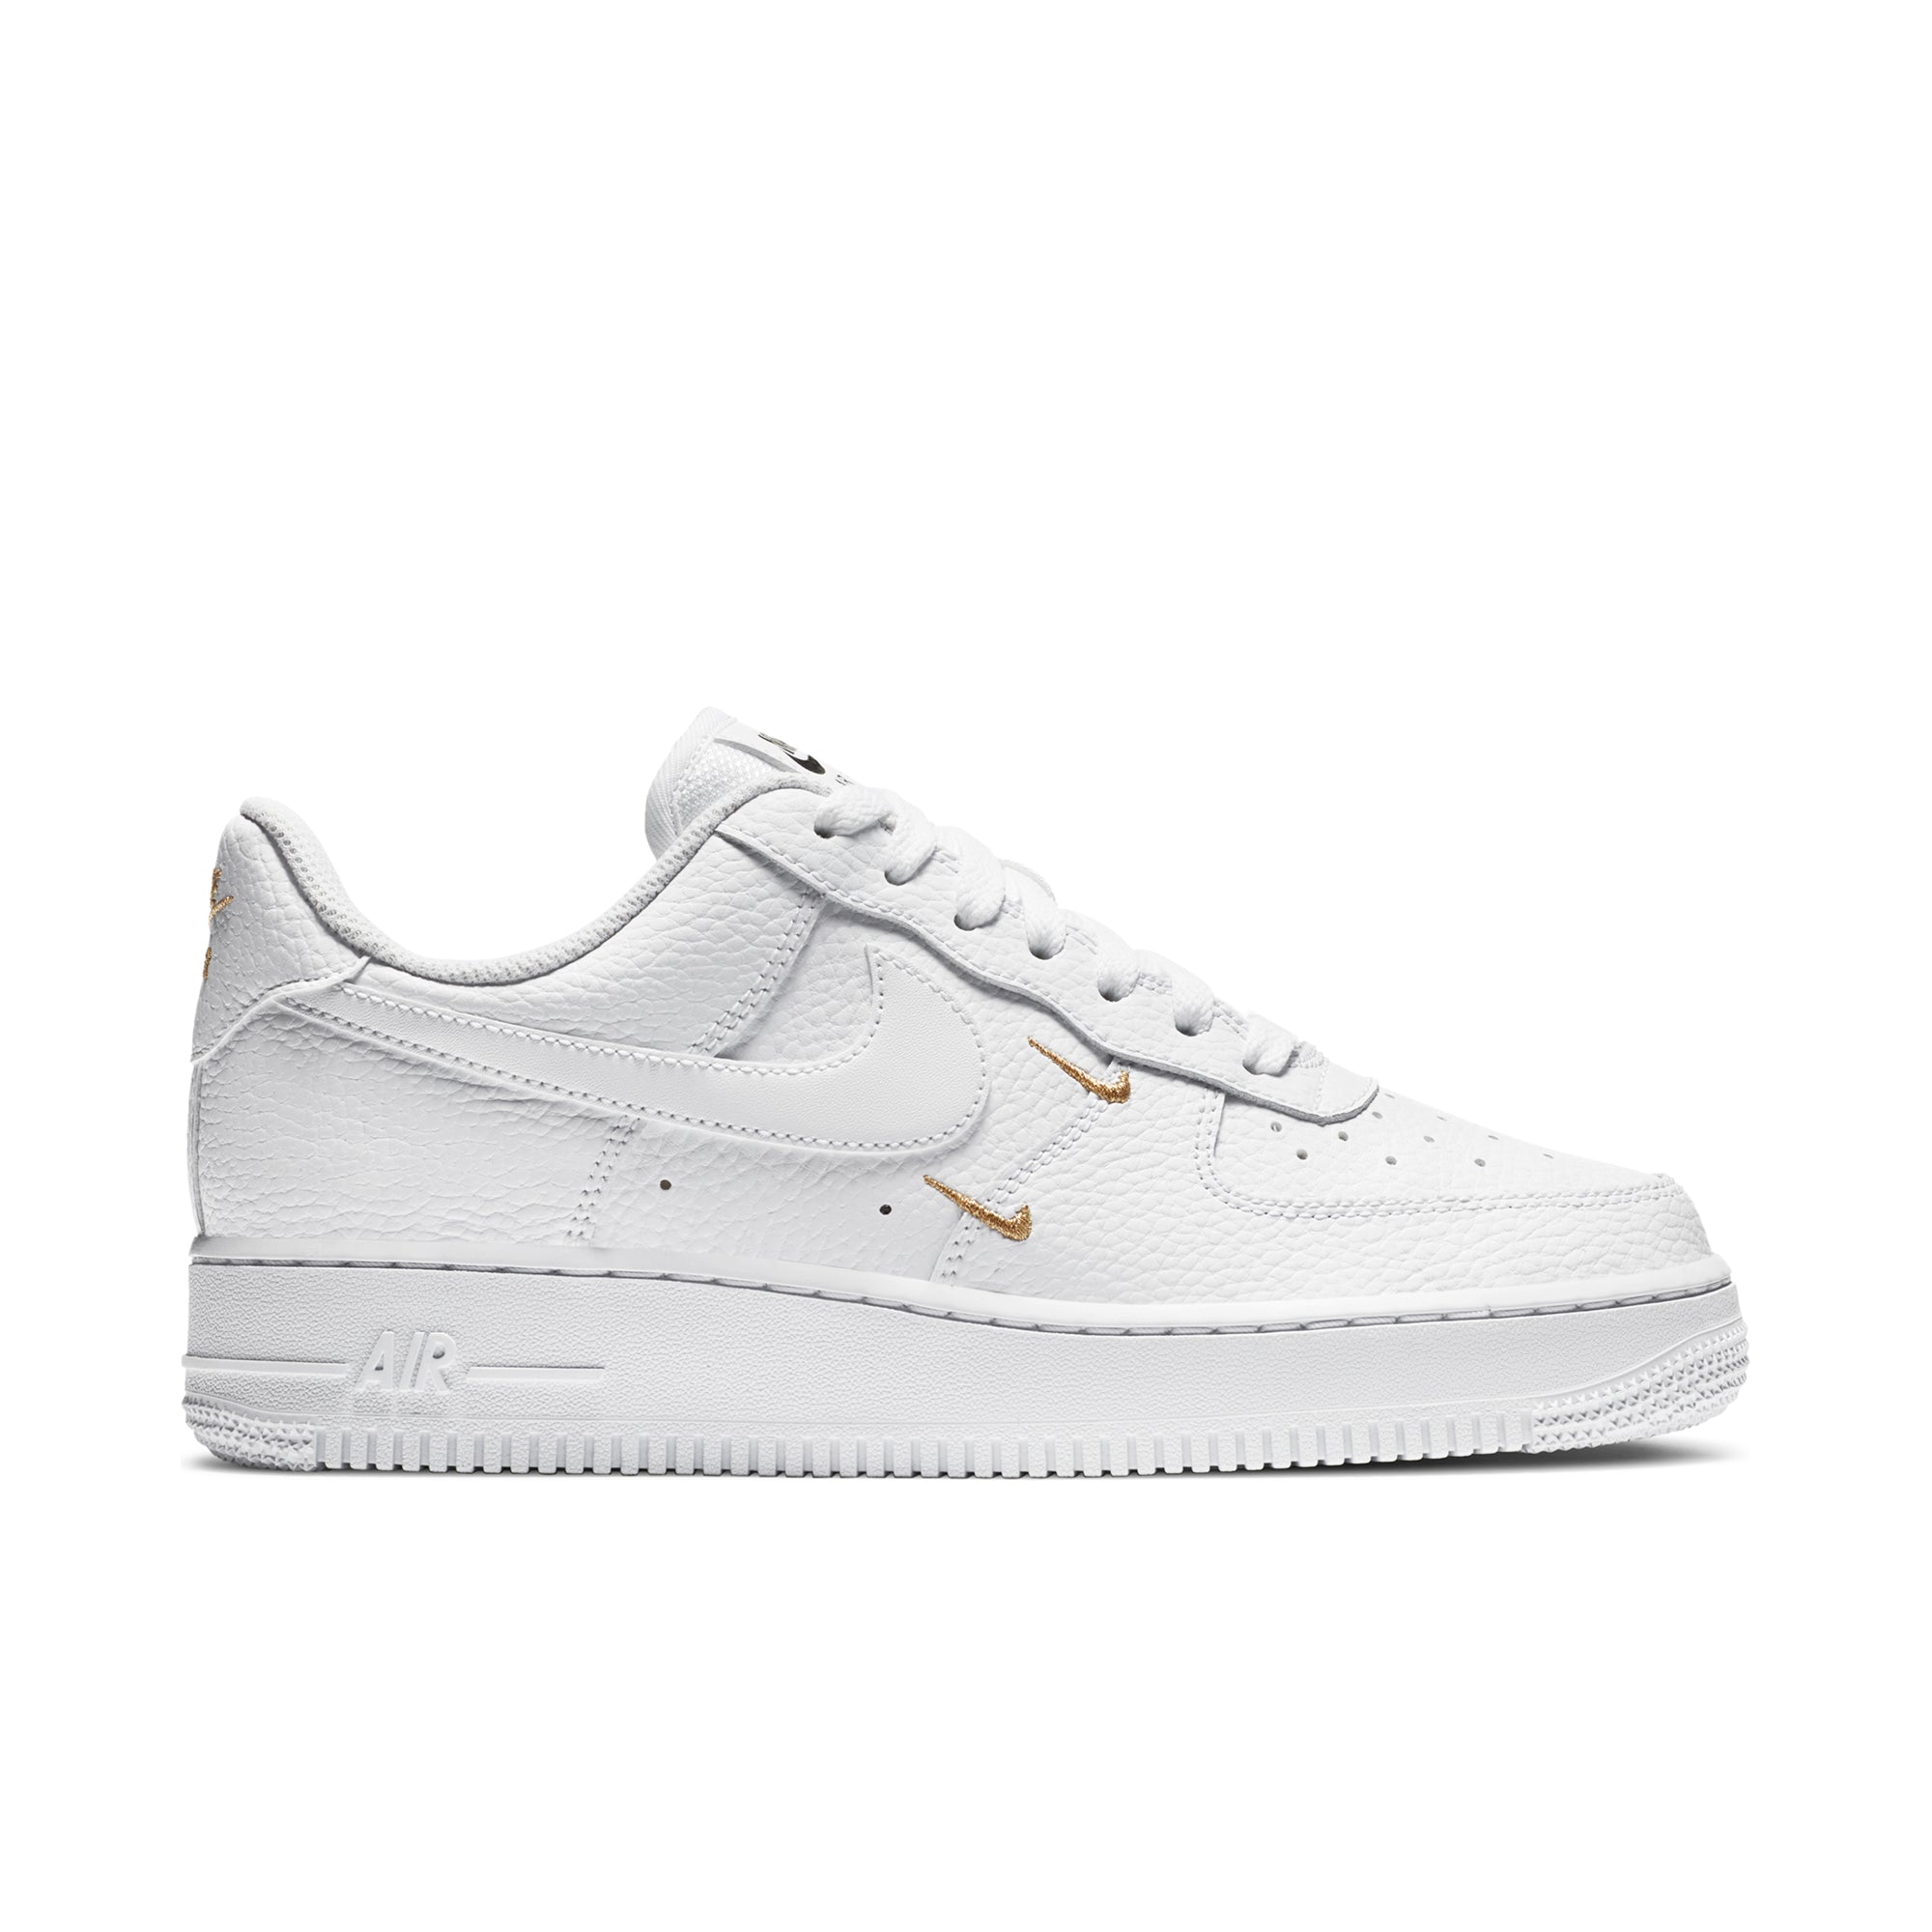 nike air force 1 '07 essential Nike Air Force 1 Low 07 Essential White Metallic Gold W | CT1989-100 38 - Livrare express 24 ore